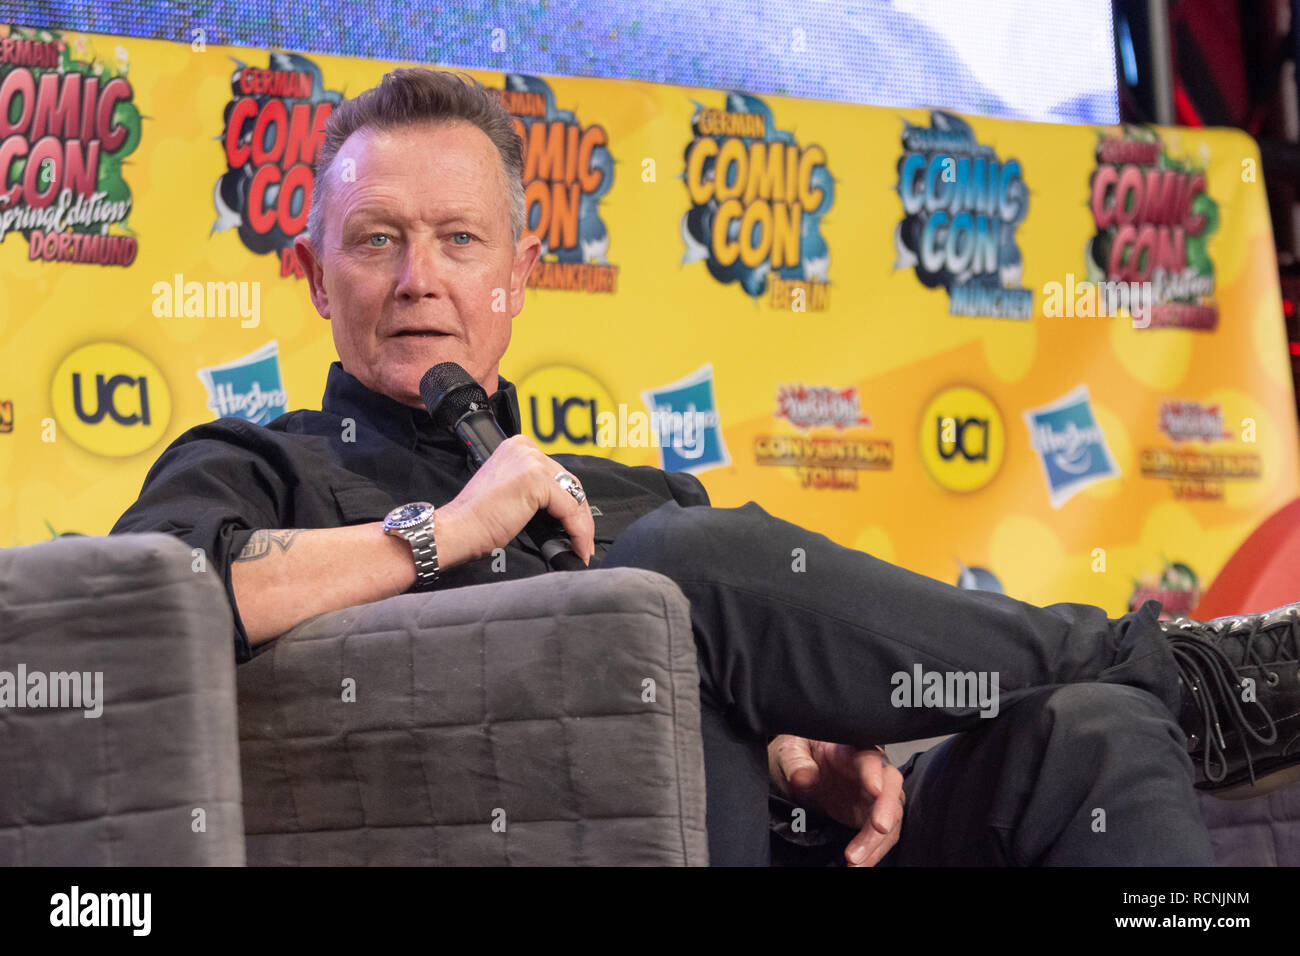 DORTMUND, GERMANY - December 1st 2018: Robert Patrick (*1958, actor, The X-Files, Terminator 2) at German Comic Con Dortmund, a two day fan convention Stock Photo